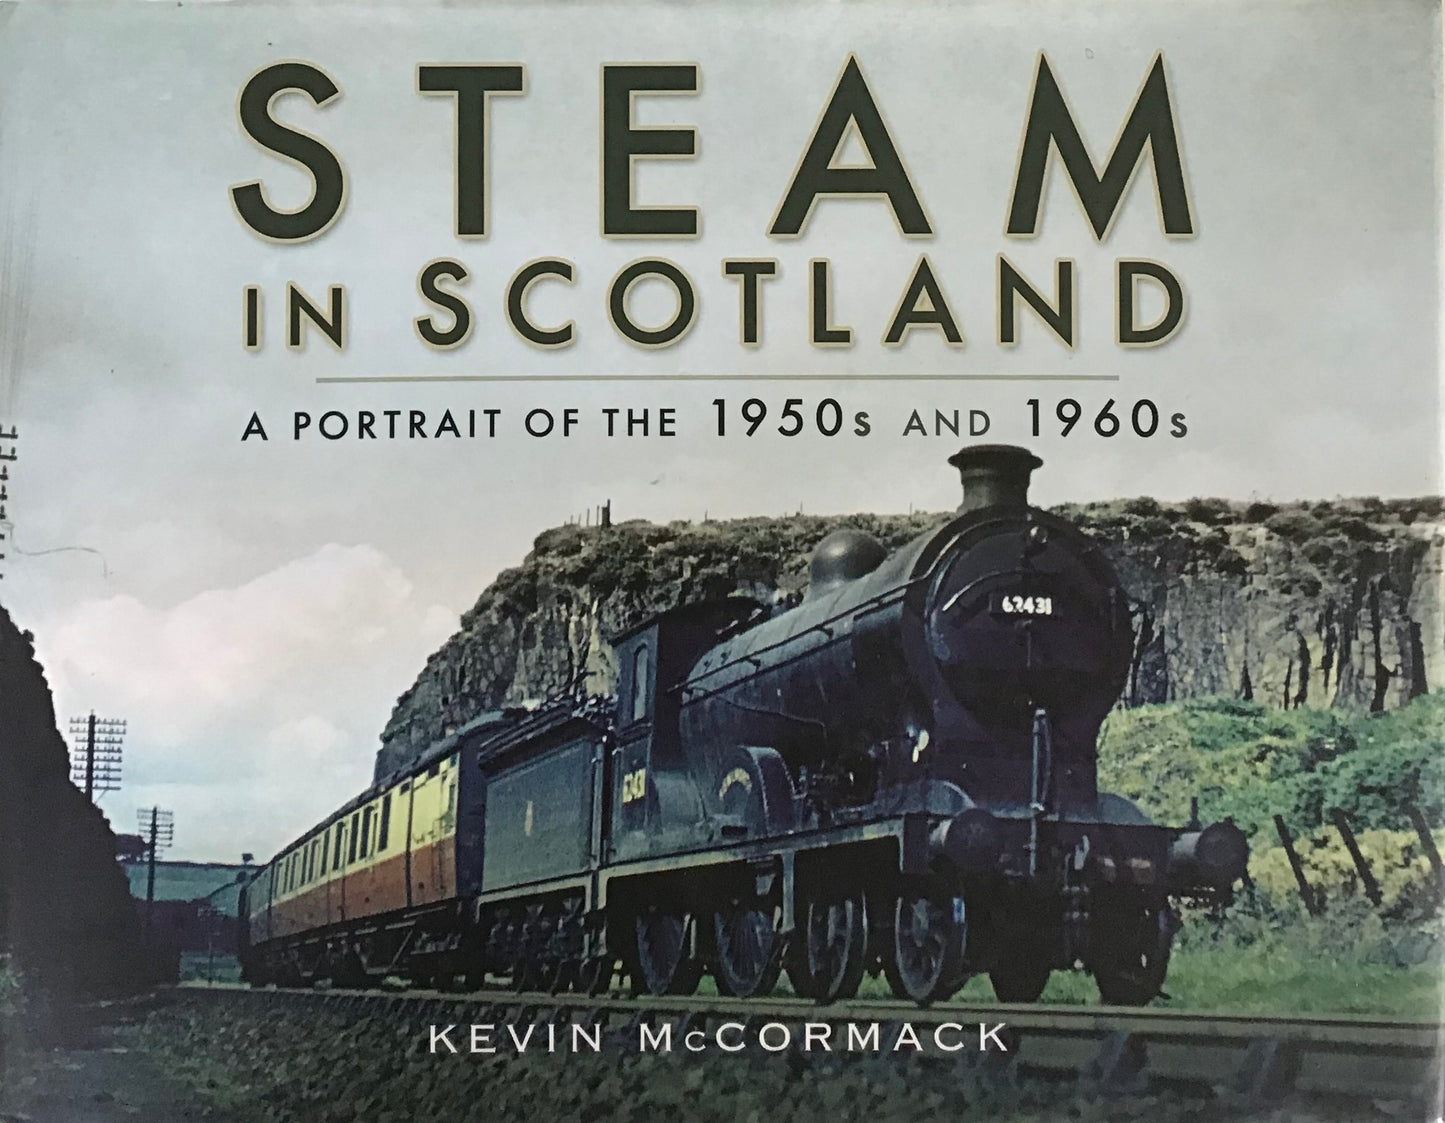 Steam in Scotland: A Portrait of the 1950s and 1960s - Kevin McCormack - Chester Model Centre